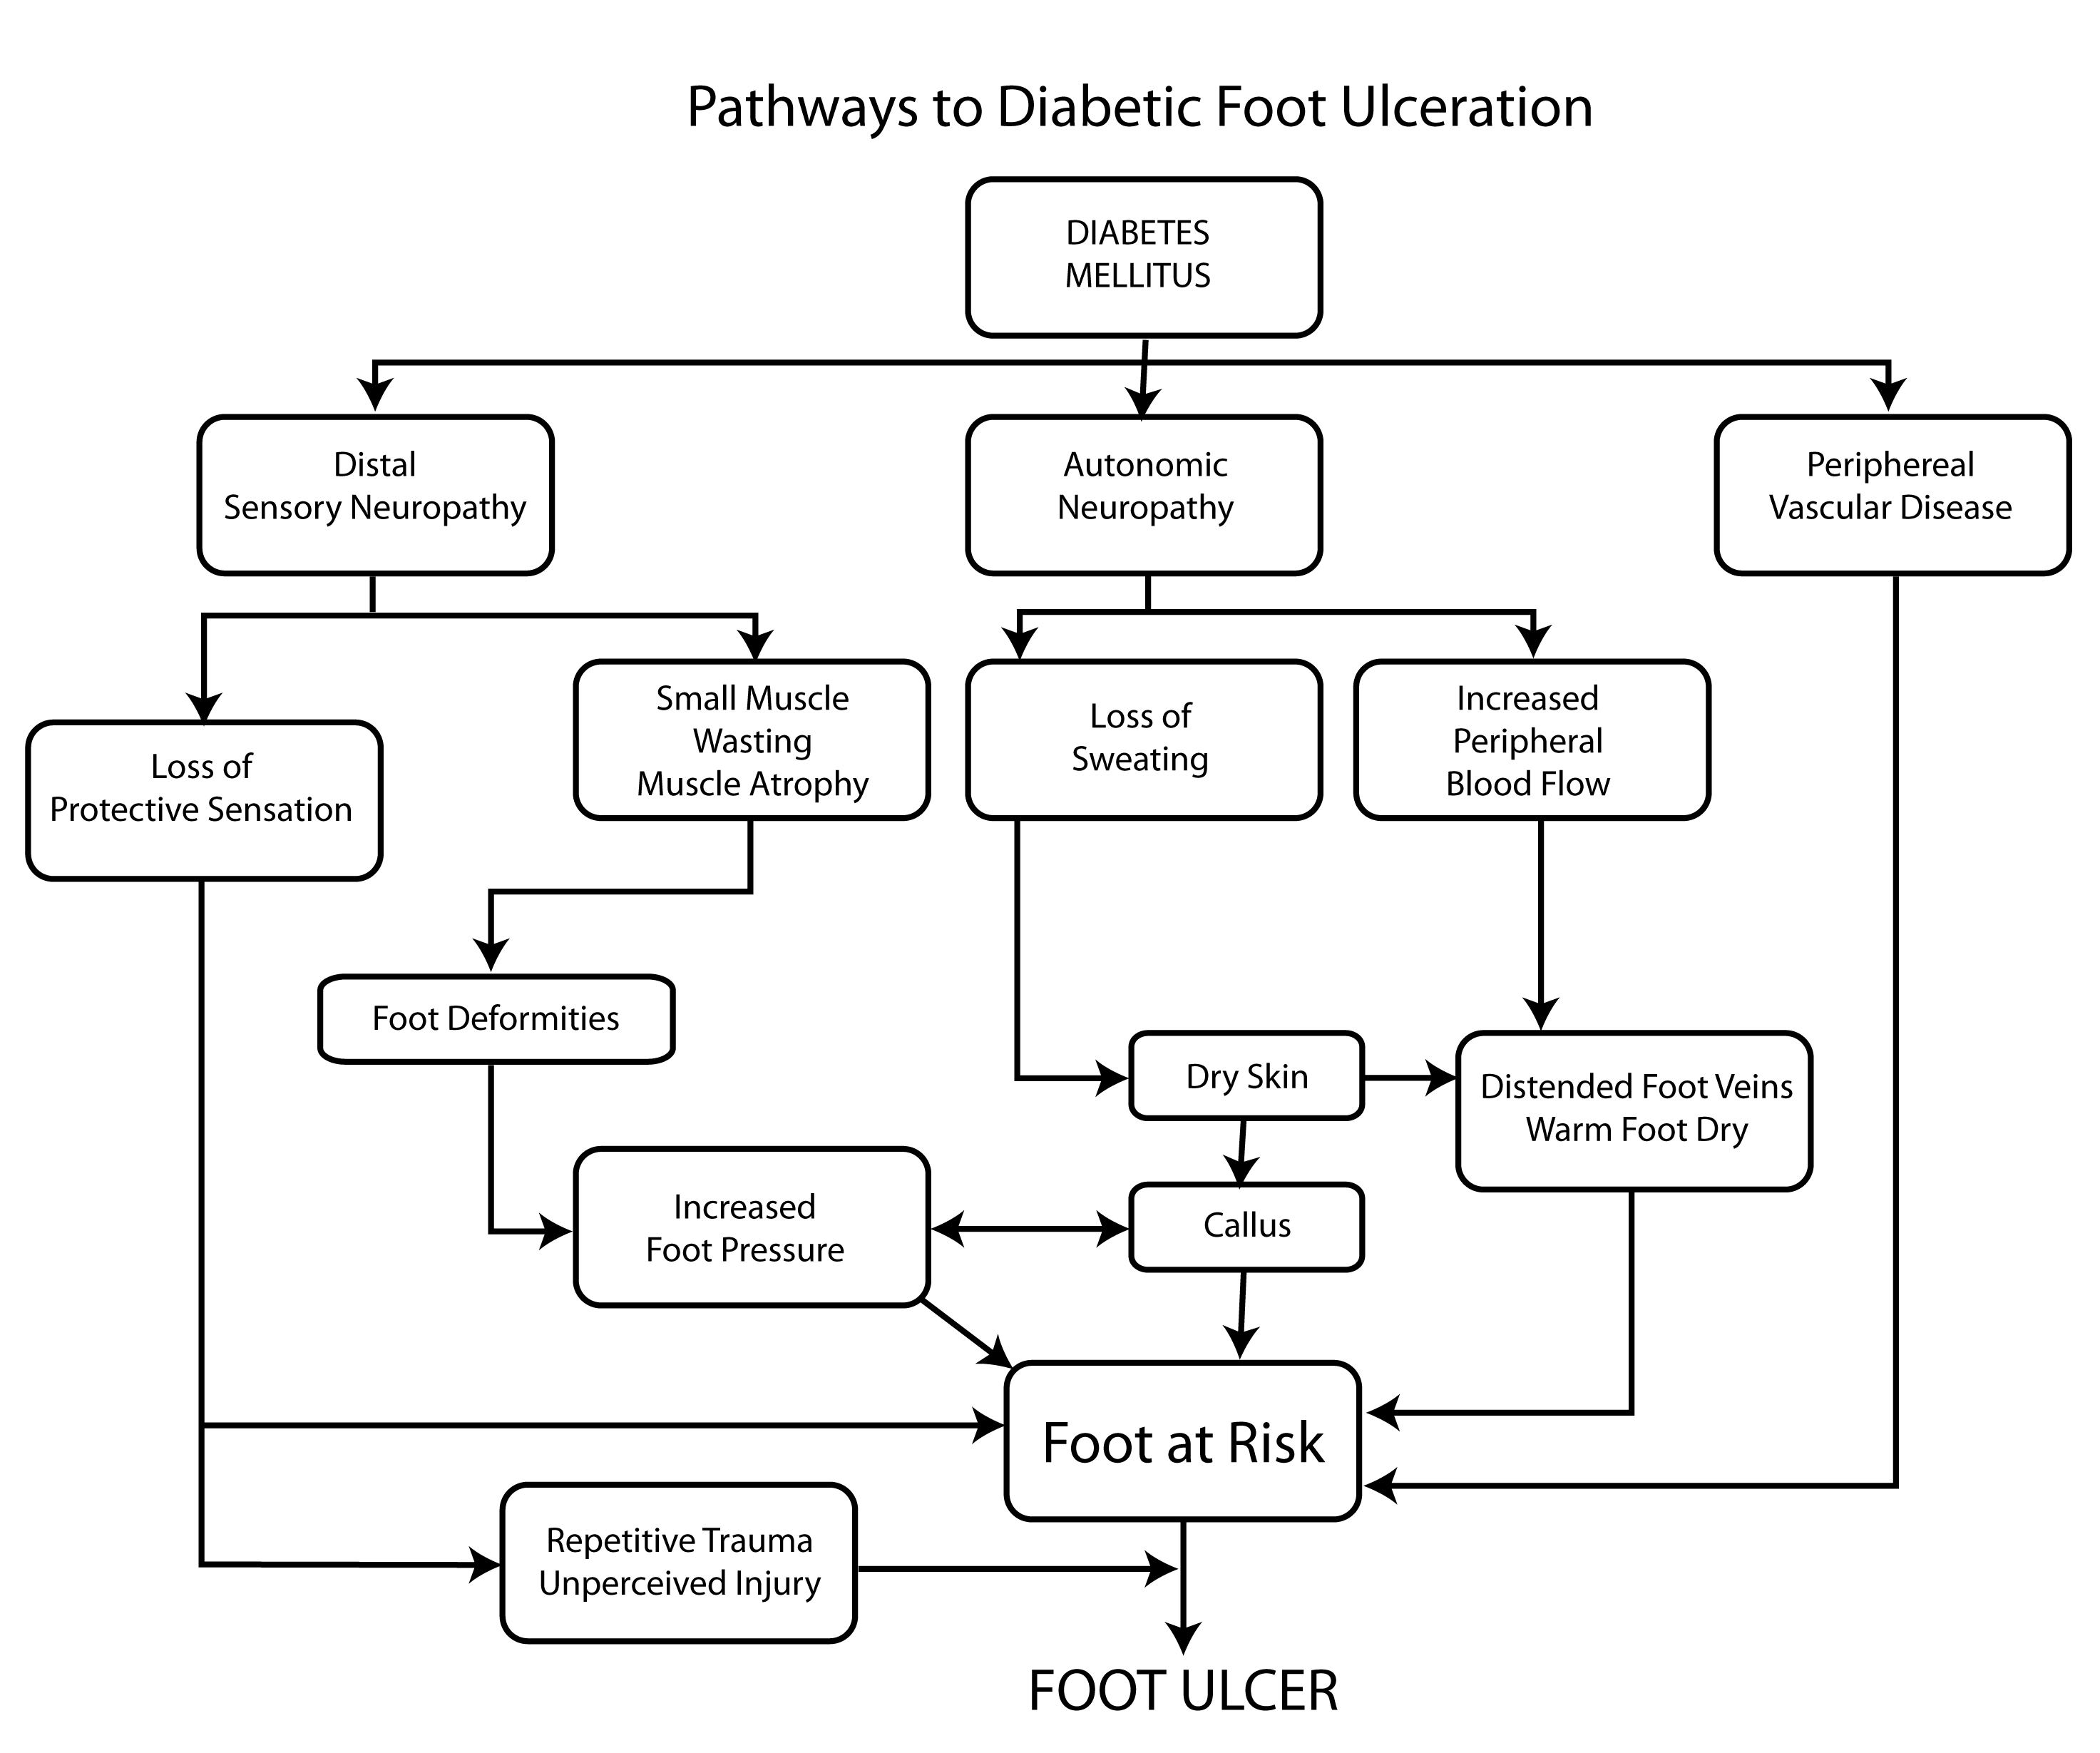 Figure 1. Pathways to diabetic foot ulceration.